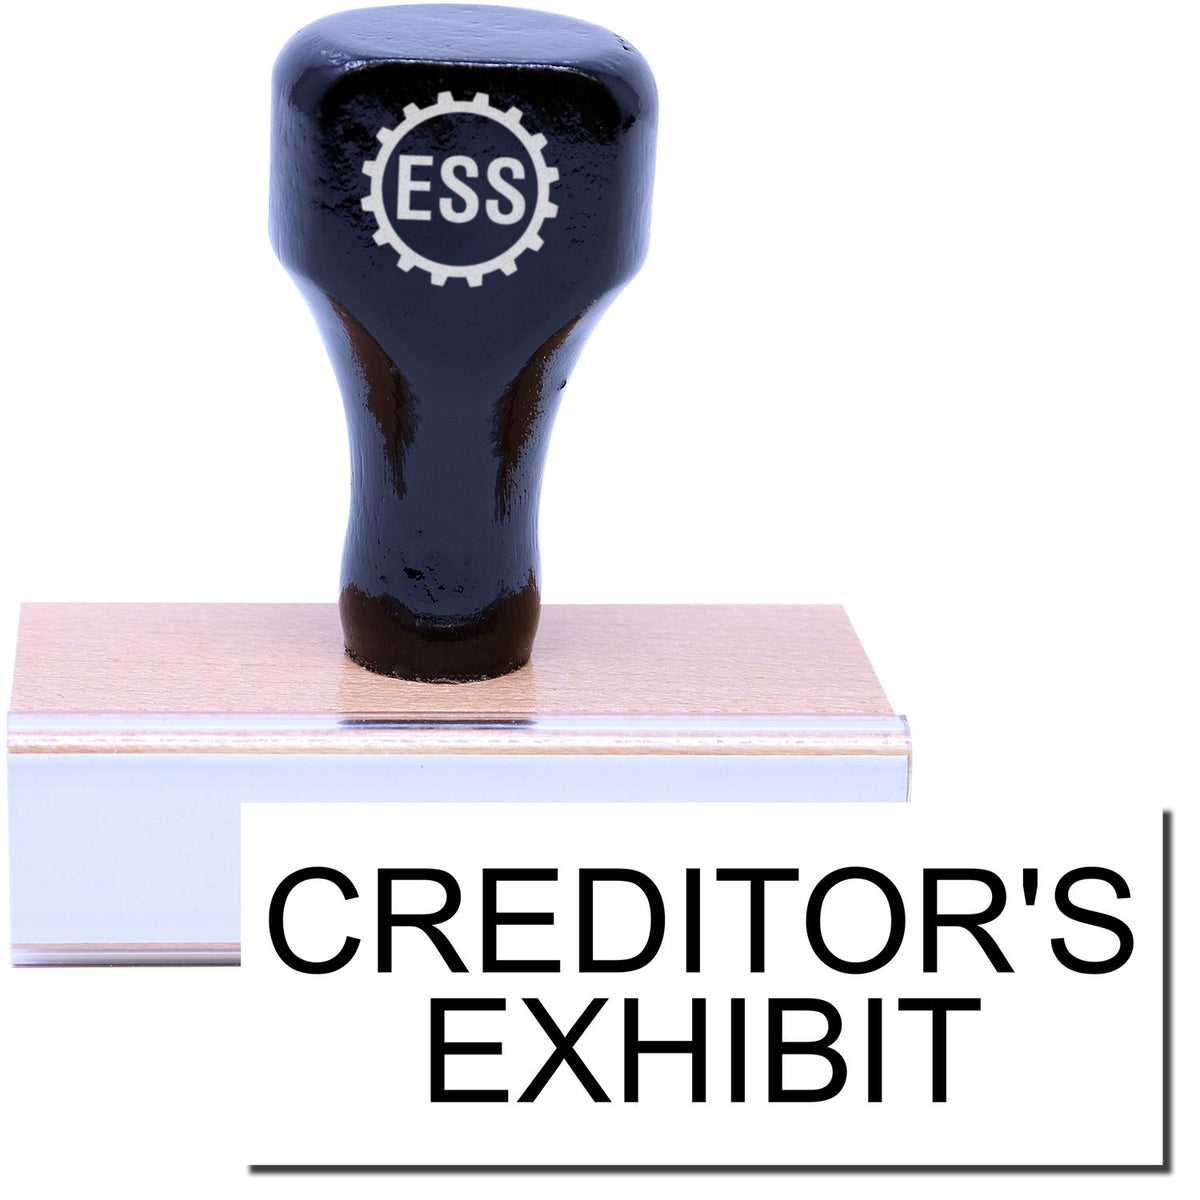 A stock office rubber stamp with a stamped image showing how the text &quot;CREDITOR&#39;S EXHIBIT&quot; is displayed after stamping.